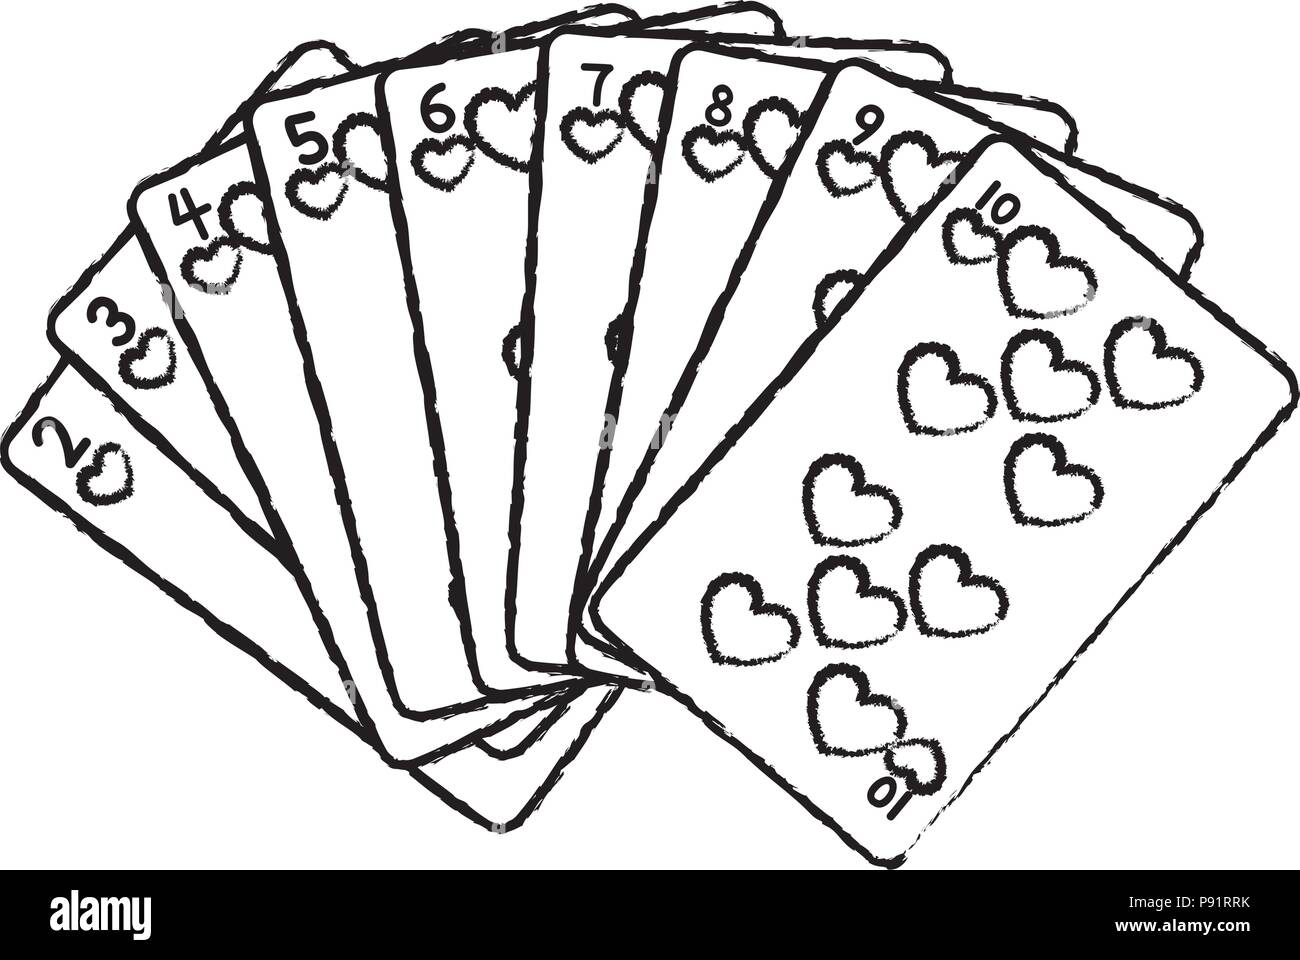 Playing cards vectors black and white stock photos images